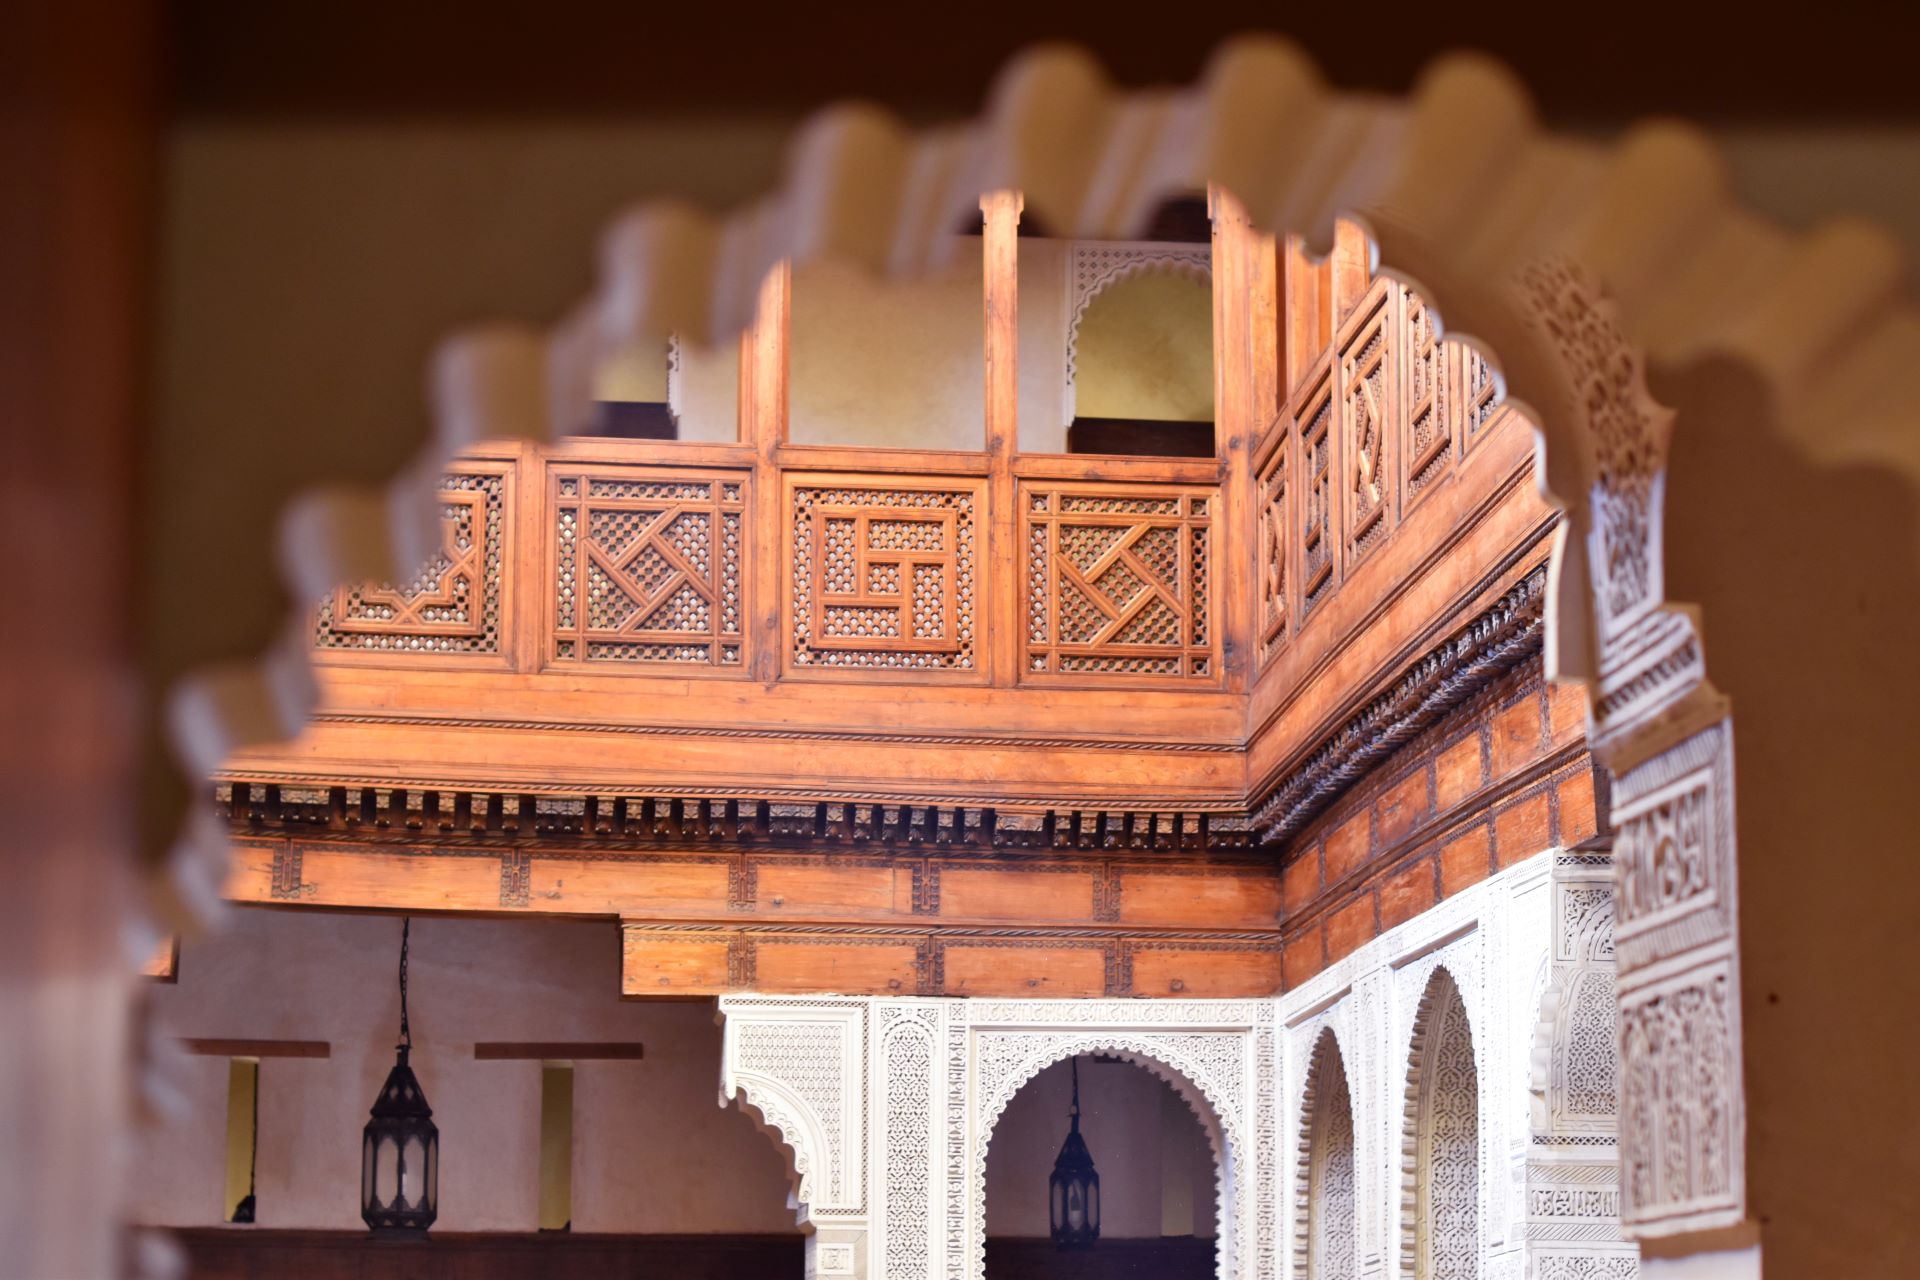 Moroccan architecture consolidates styles of Moorish, Islamic, Berber, and French-styled cafes and restaurants